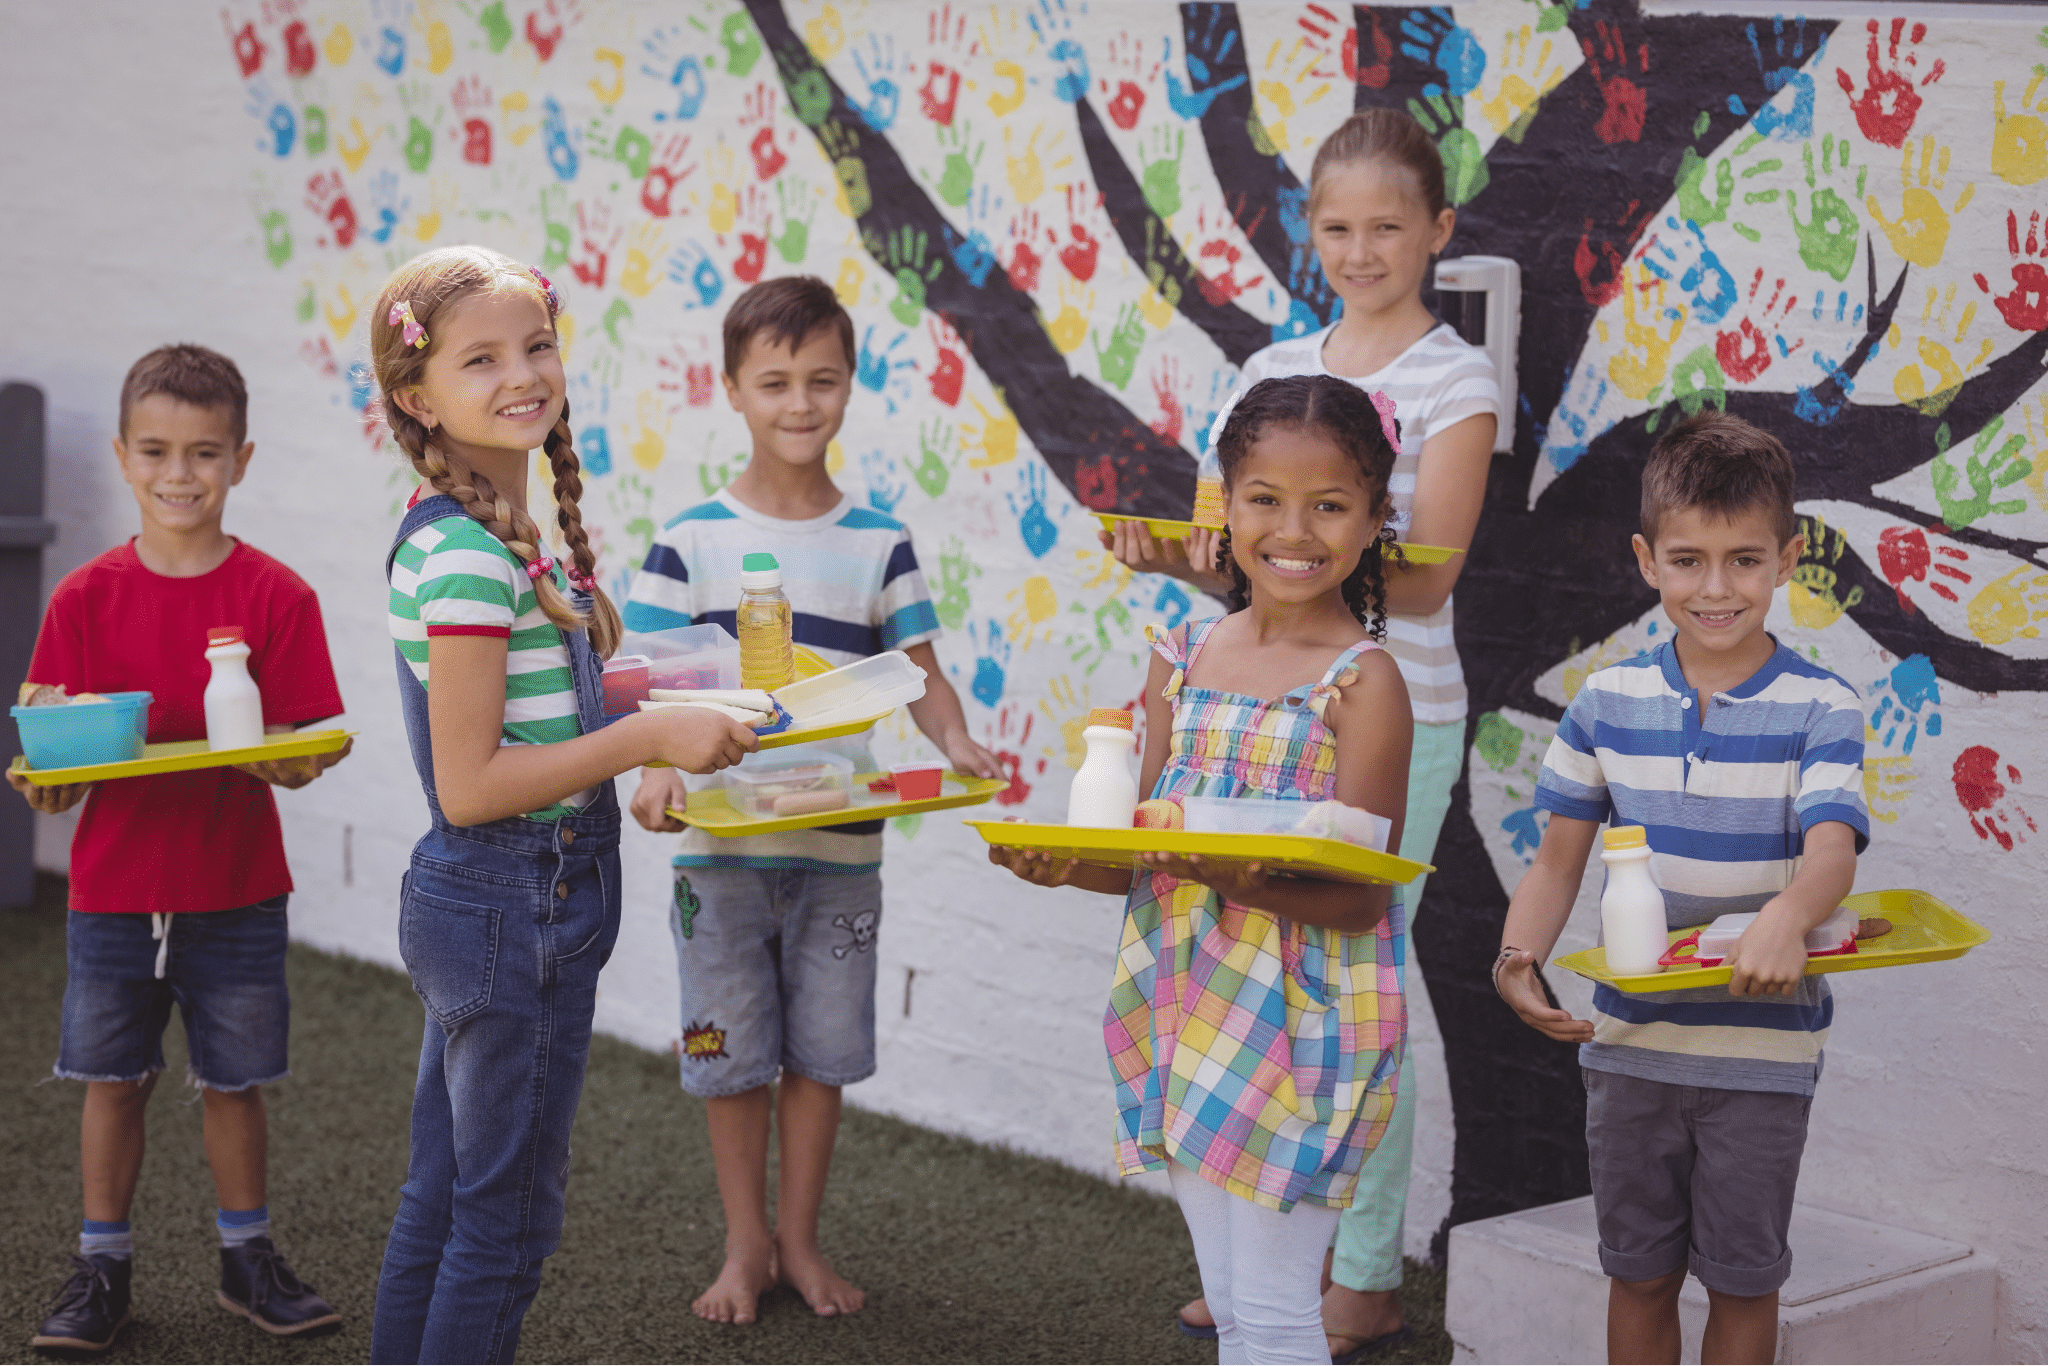 Group of six children holding lunch trays at a school with a whimsical tree with colorful leaves painted on a white brick wall behind them.